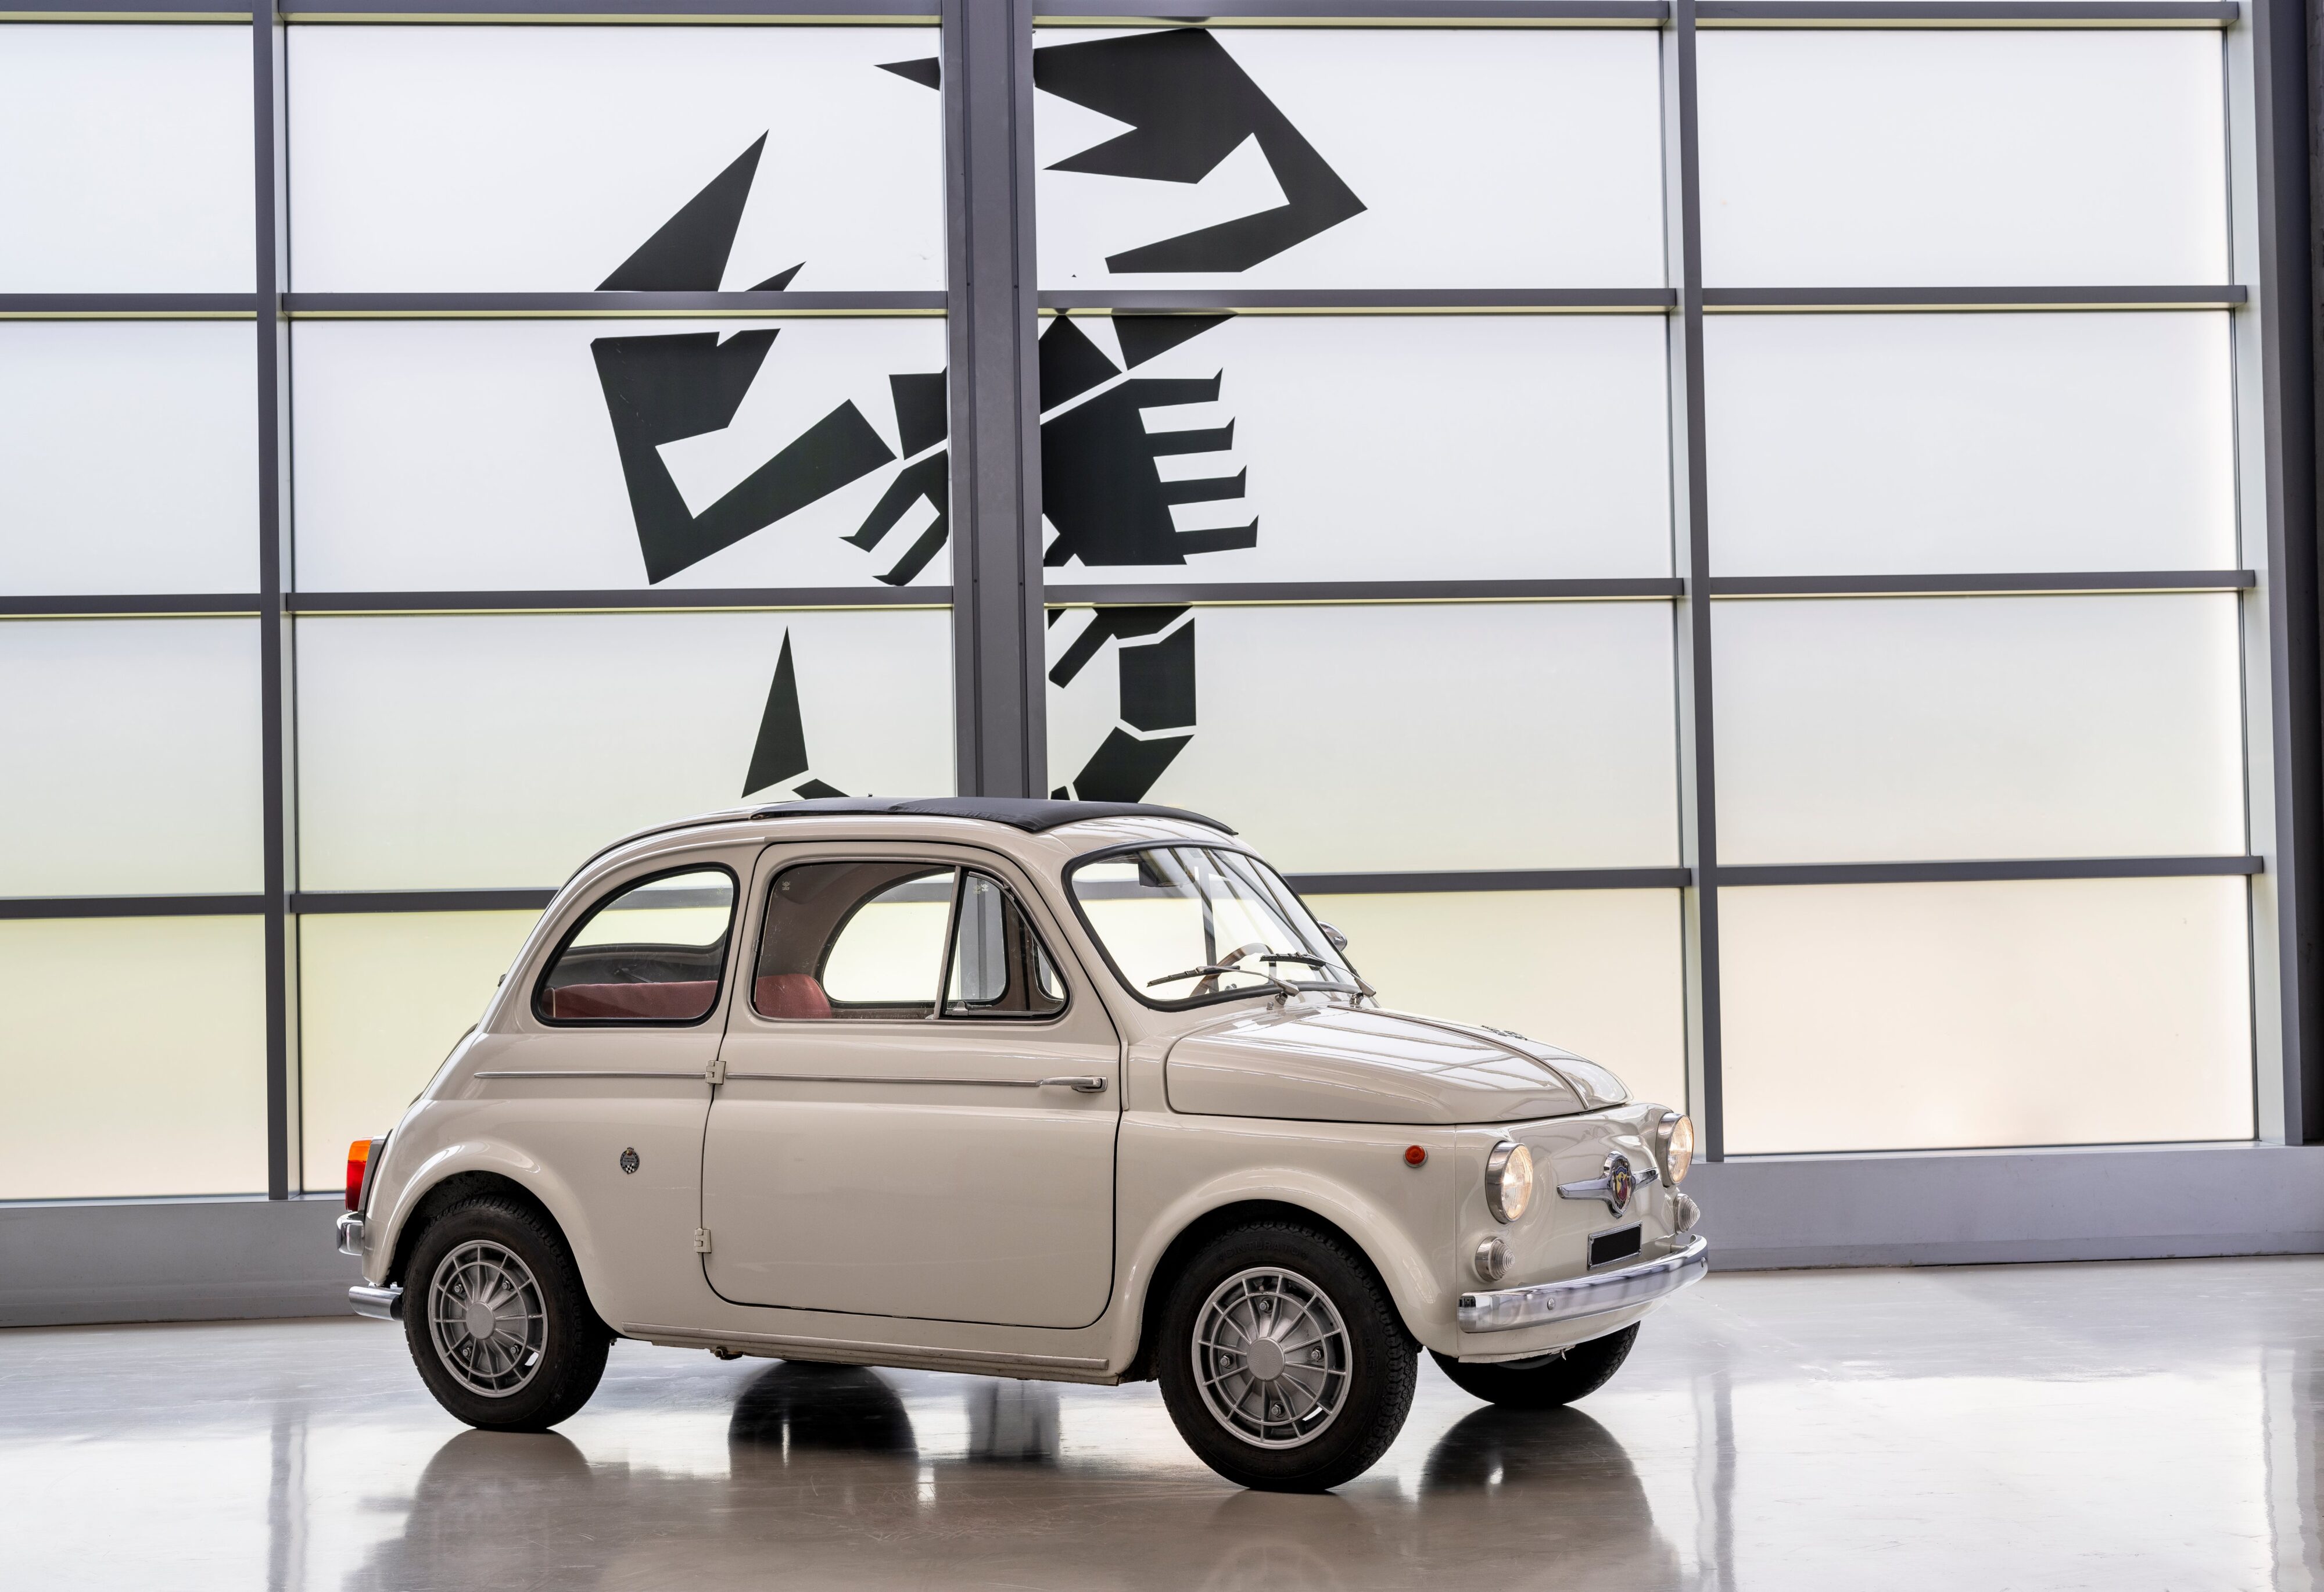 A photo of a 1963 Abarth 595 parked in front of a large Scorpion symbol, the emblem of the brand.